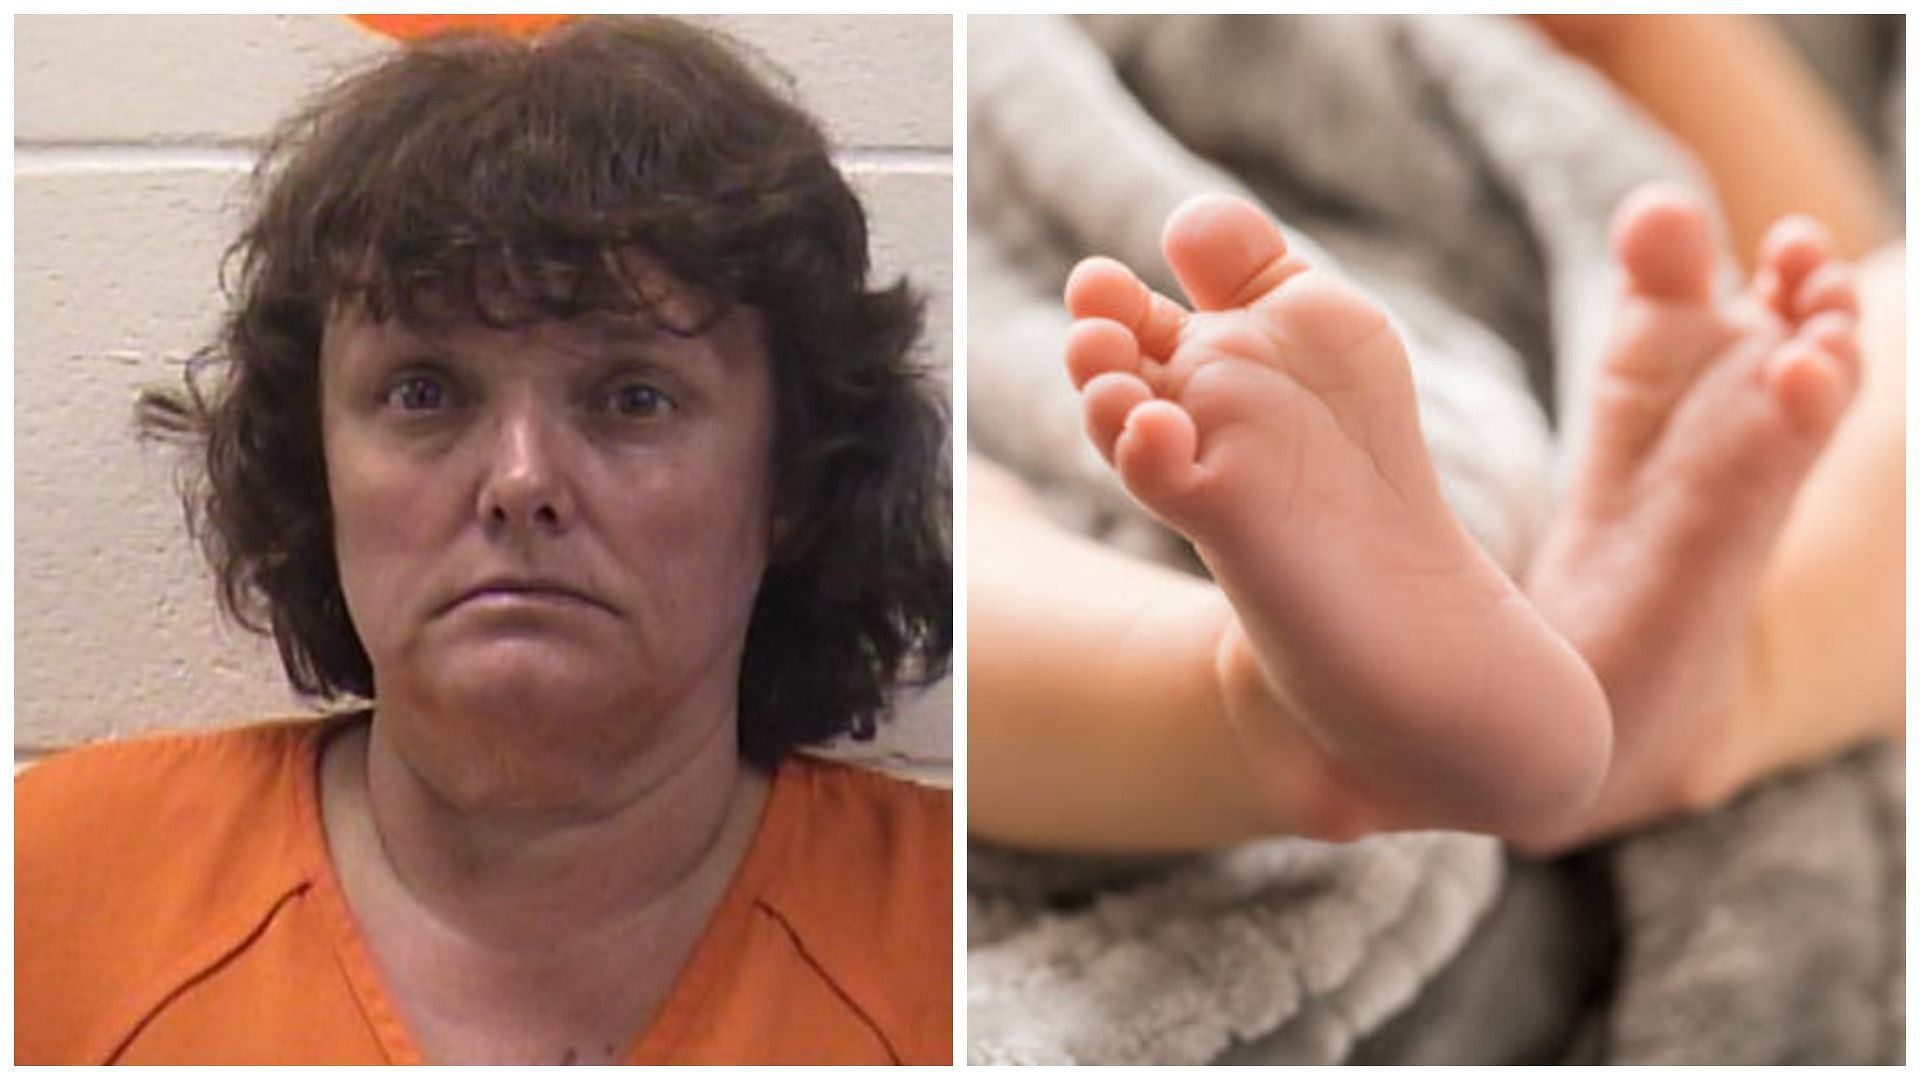 Lee Ann Daigle was charged with one count of murder for allegedly killing her baby (Image via Twitter@MENewsPhotog/Representative image via Getty)